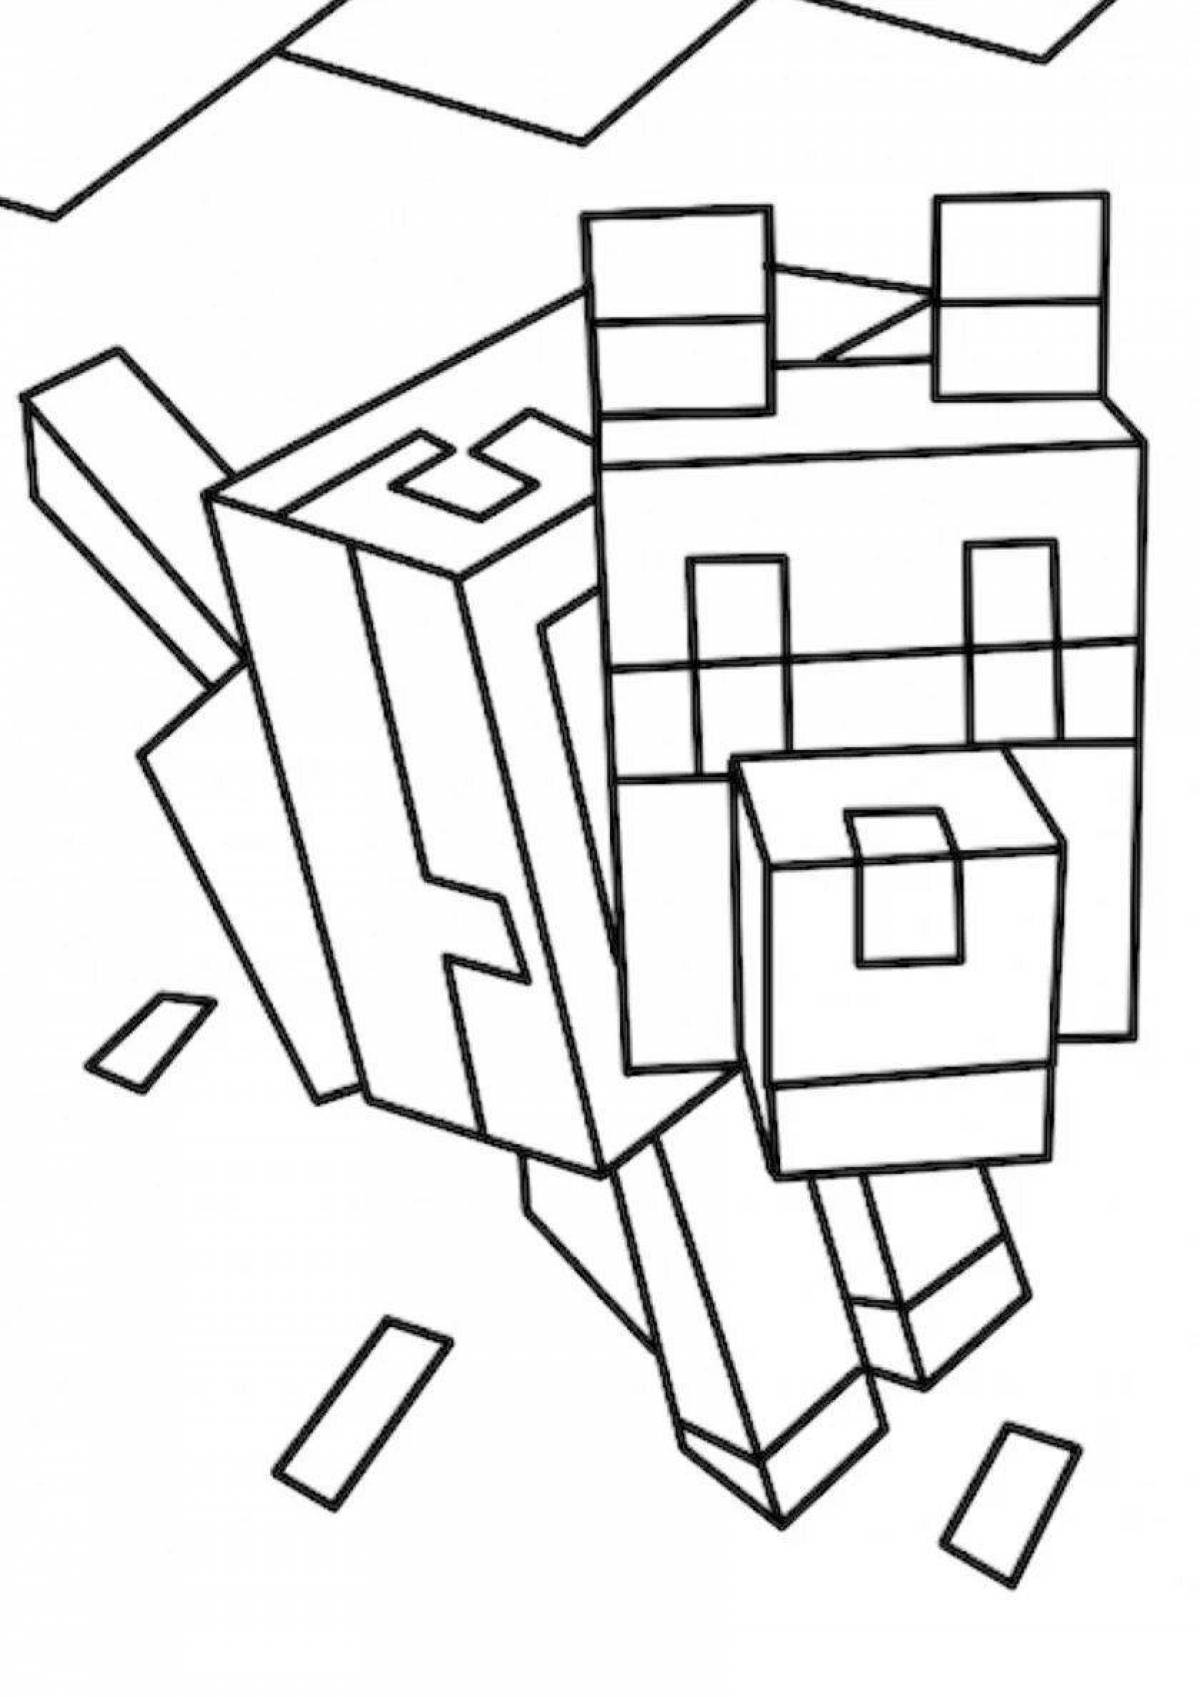 Playful minecraft animal coloring page